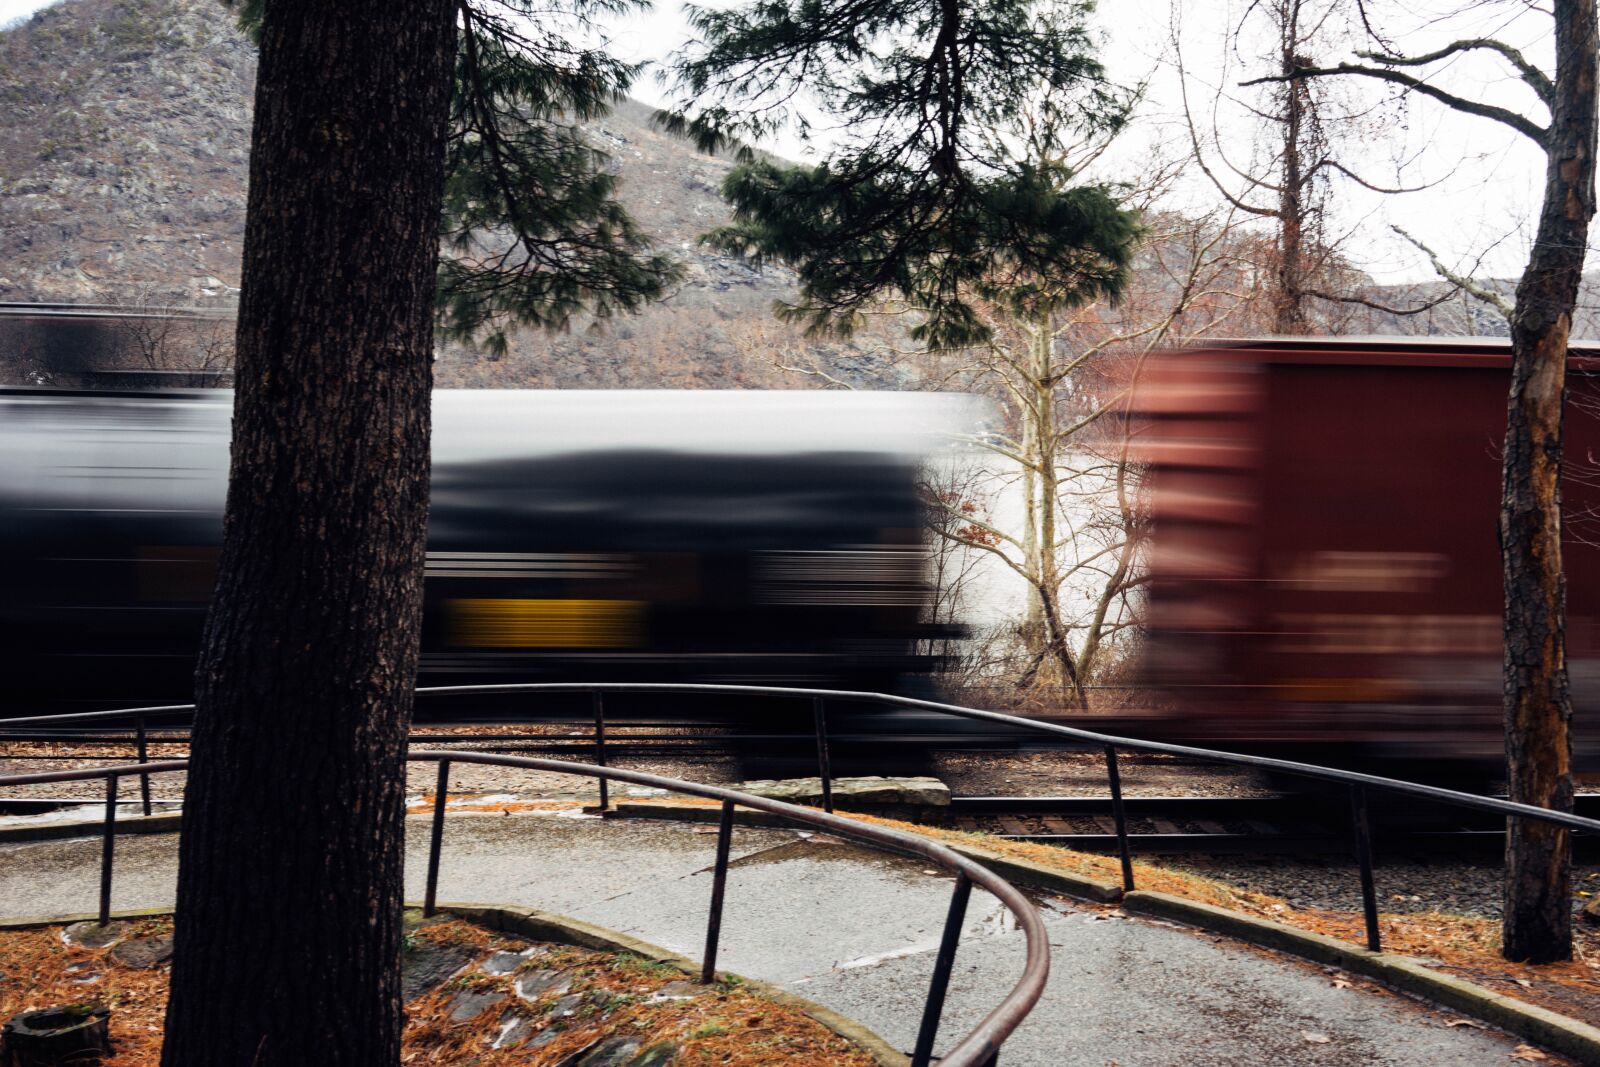 Sony a7 sample photo. Mountain, train, forest photography